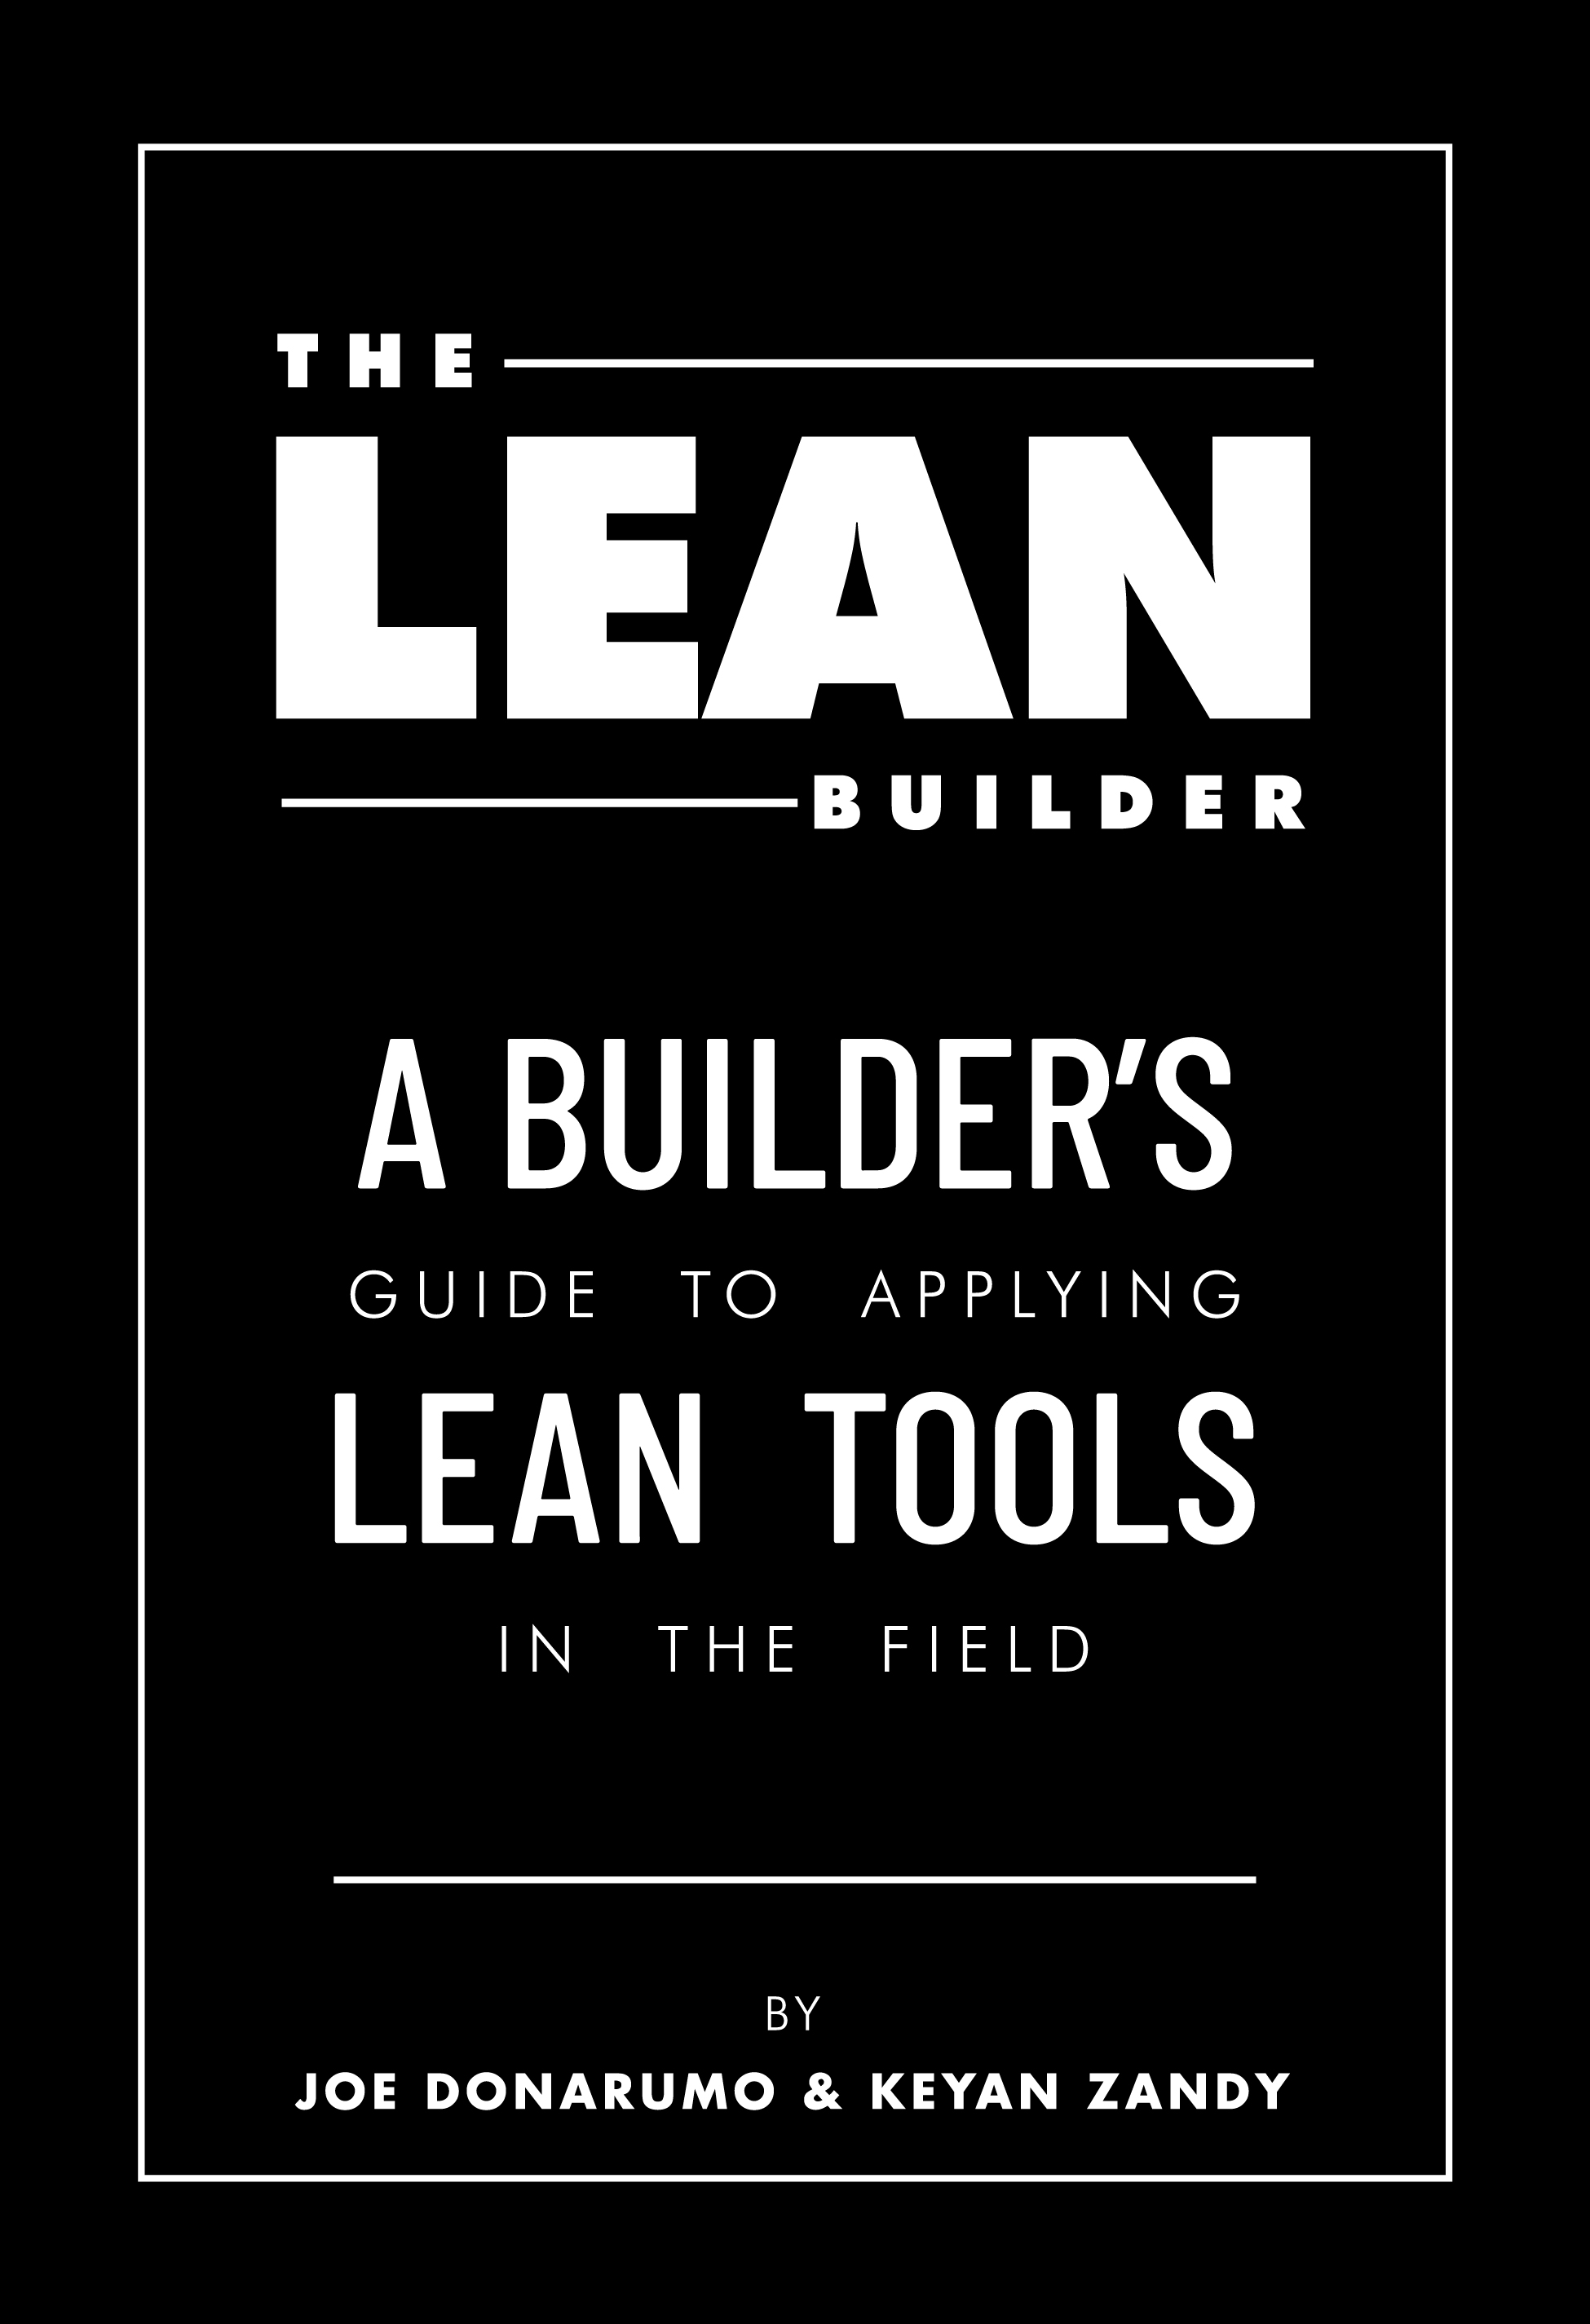 Lean Builder book cover - front.jpg